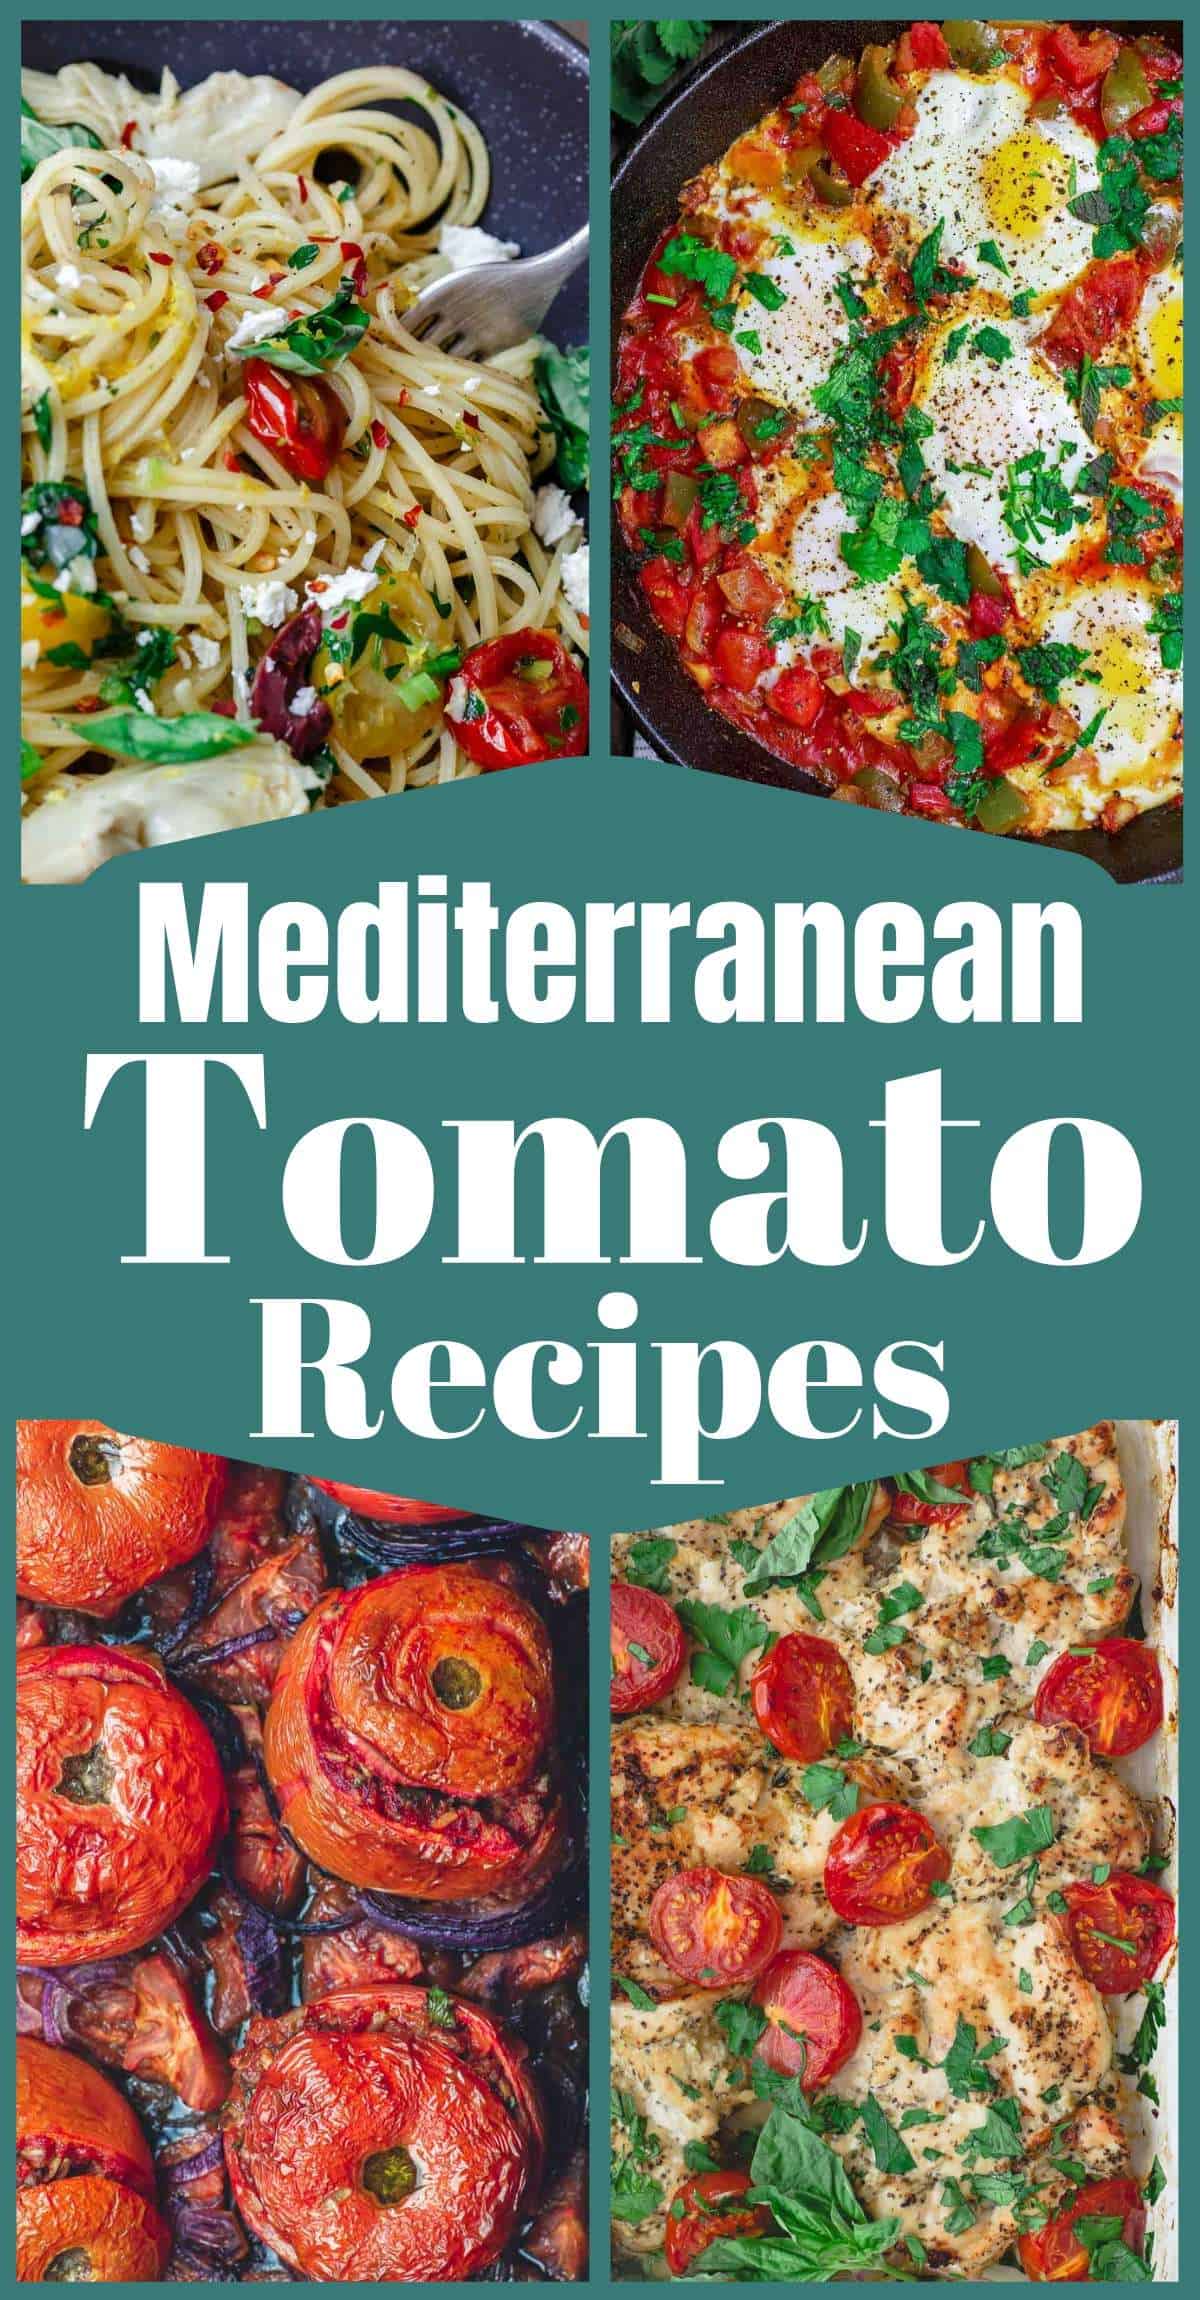 Mediterranean tomato recipes that are not salad